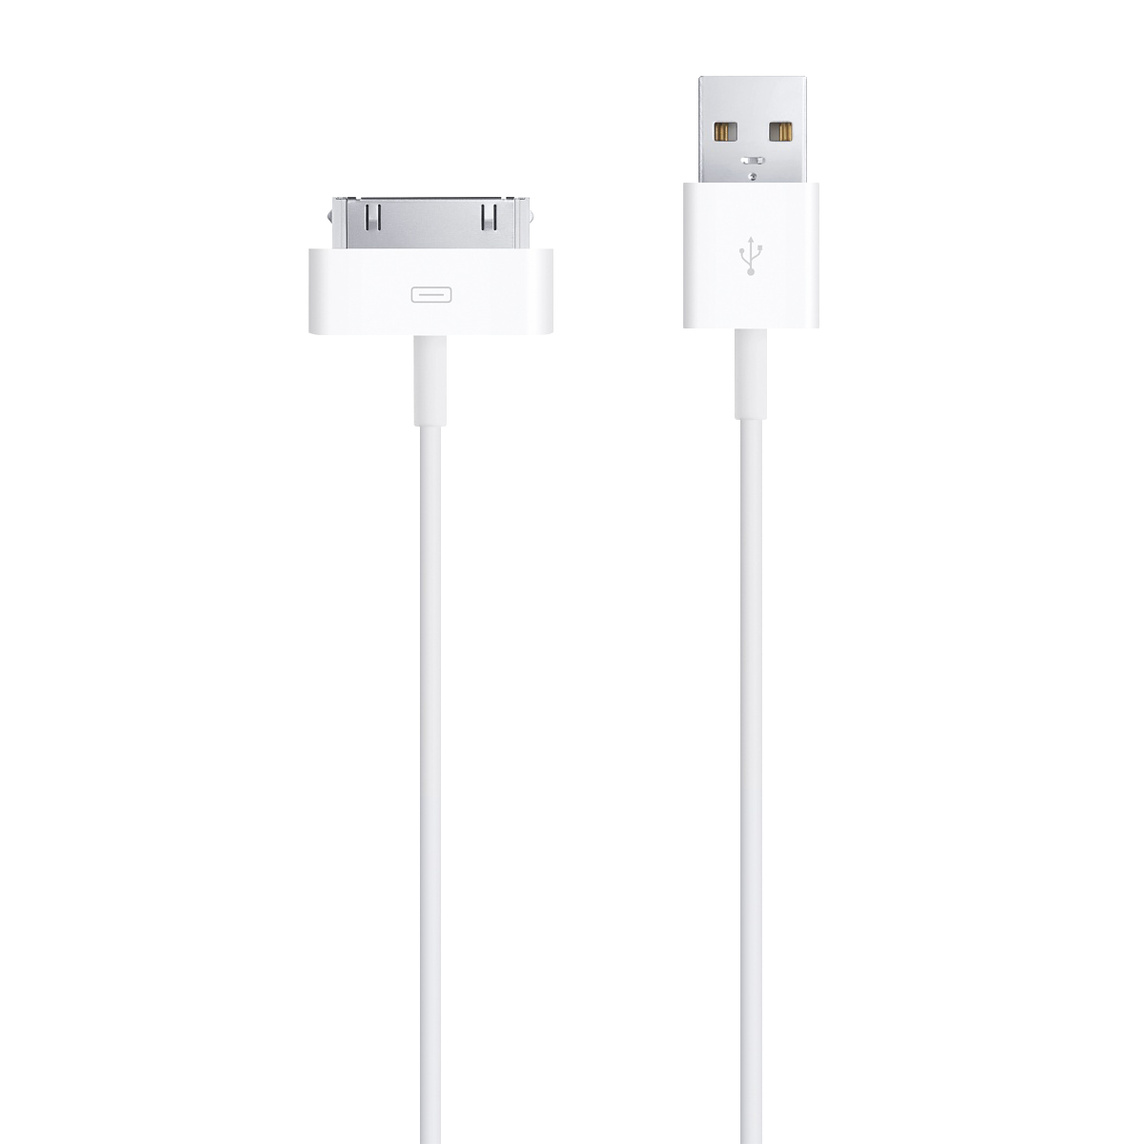 CABLE USB IPHONE CABLE IPHONE,IPOD,IPAD IPOD,IPAD;IPHONE 2G,3G,4G,4S